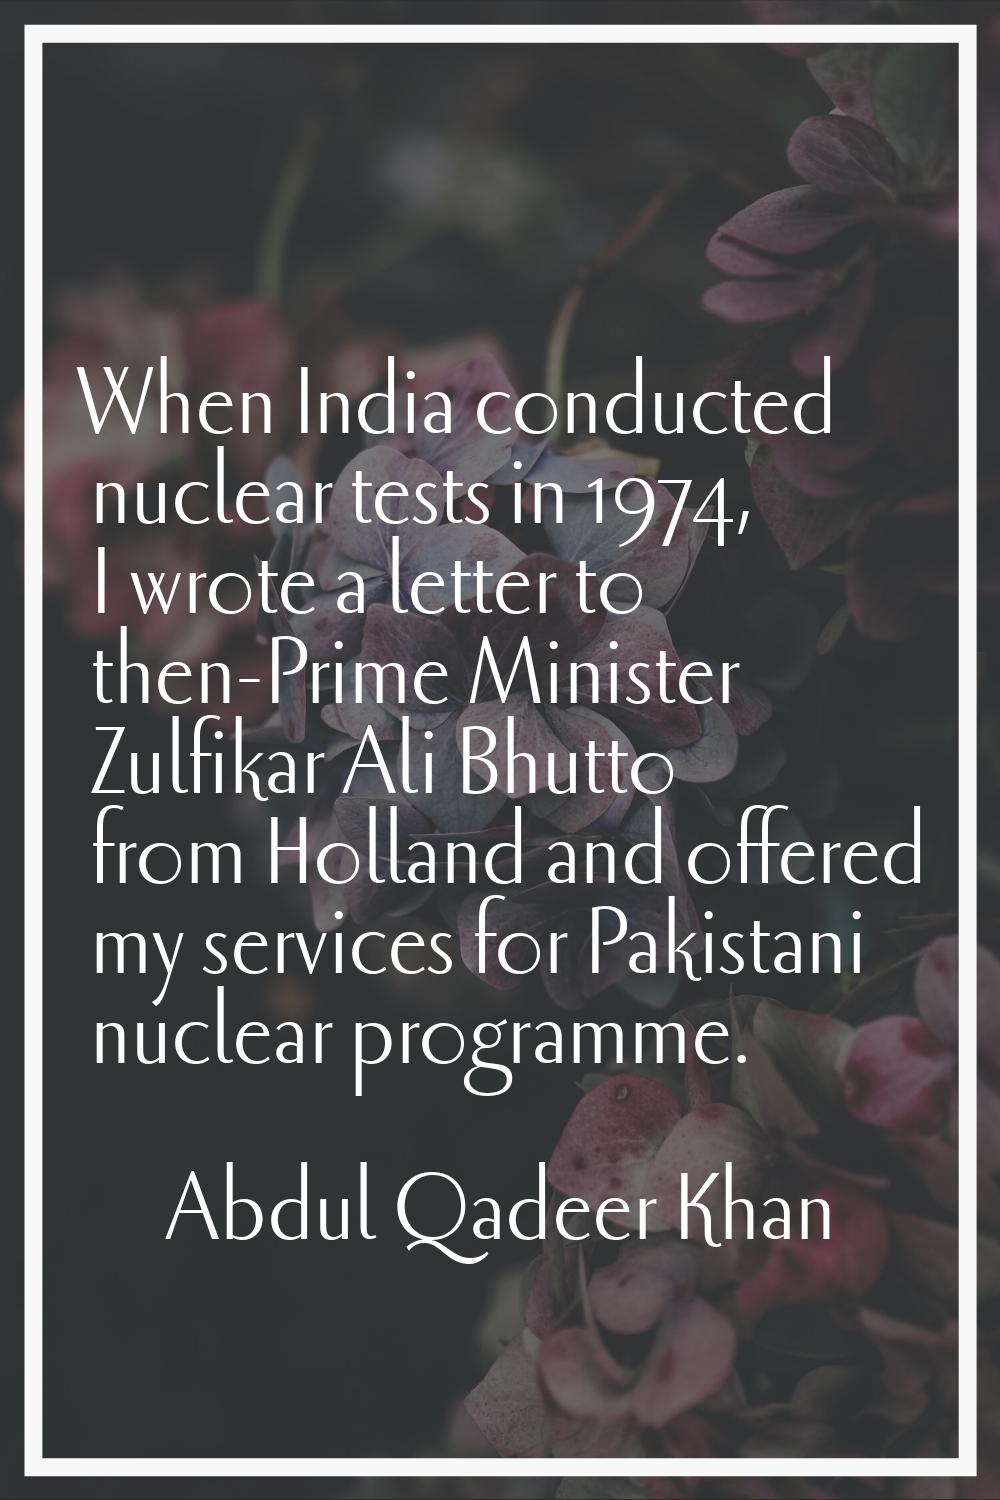 When India conducted nuclear tests in 1974, I wrote a letter to then-Prime Minister Zulfikar Ali Bh